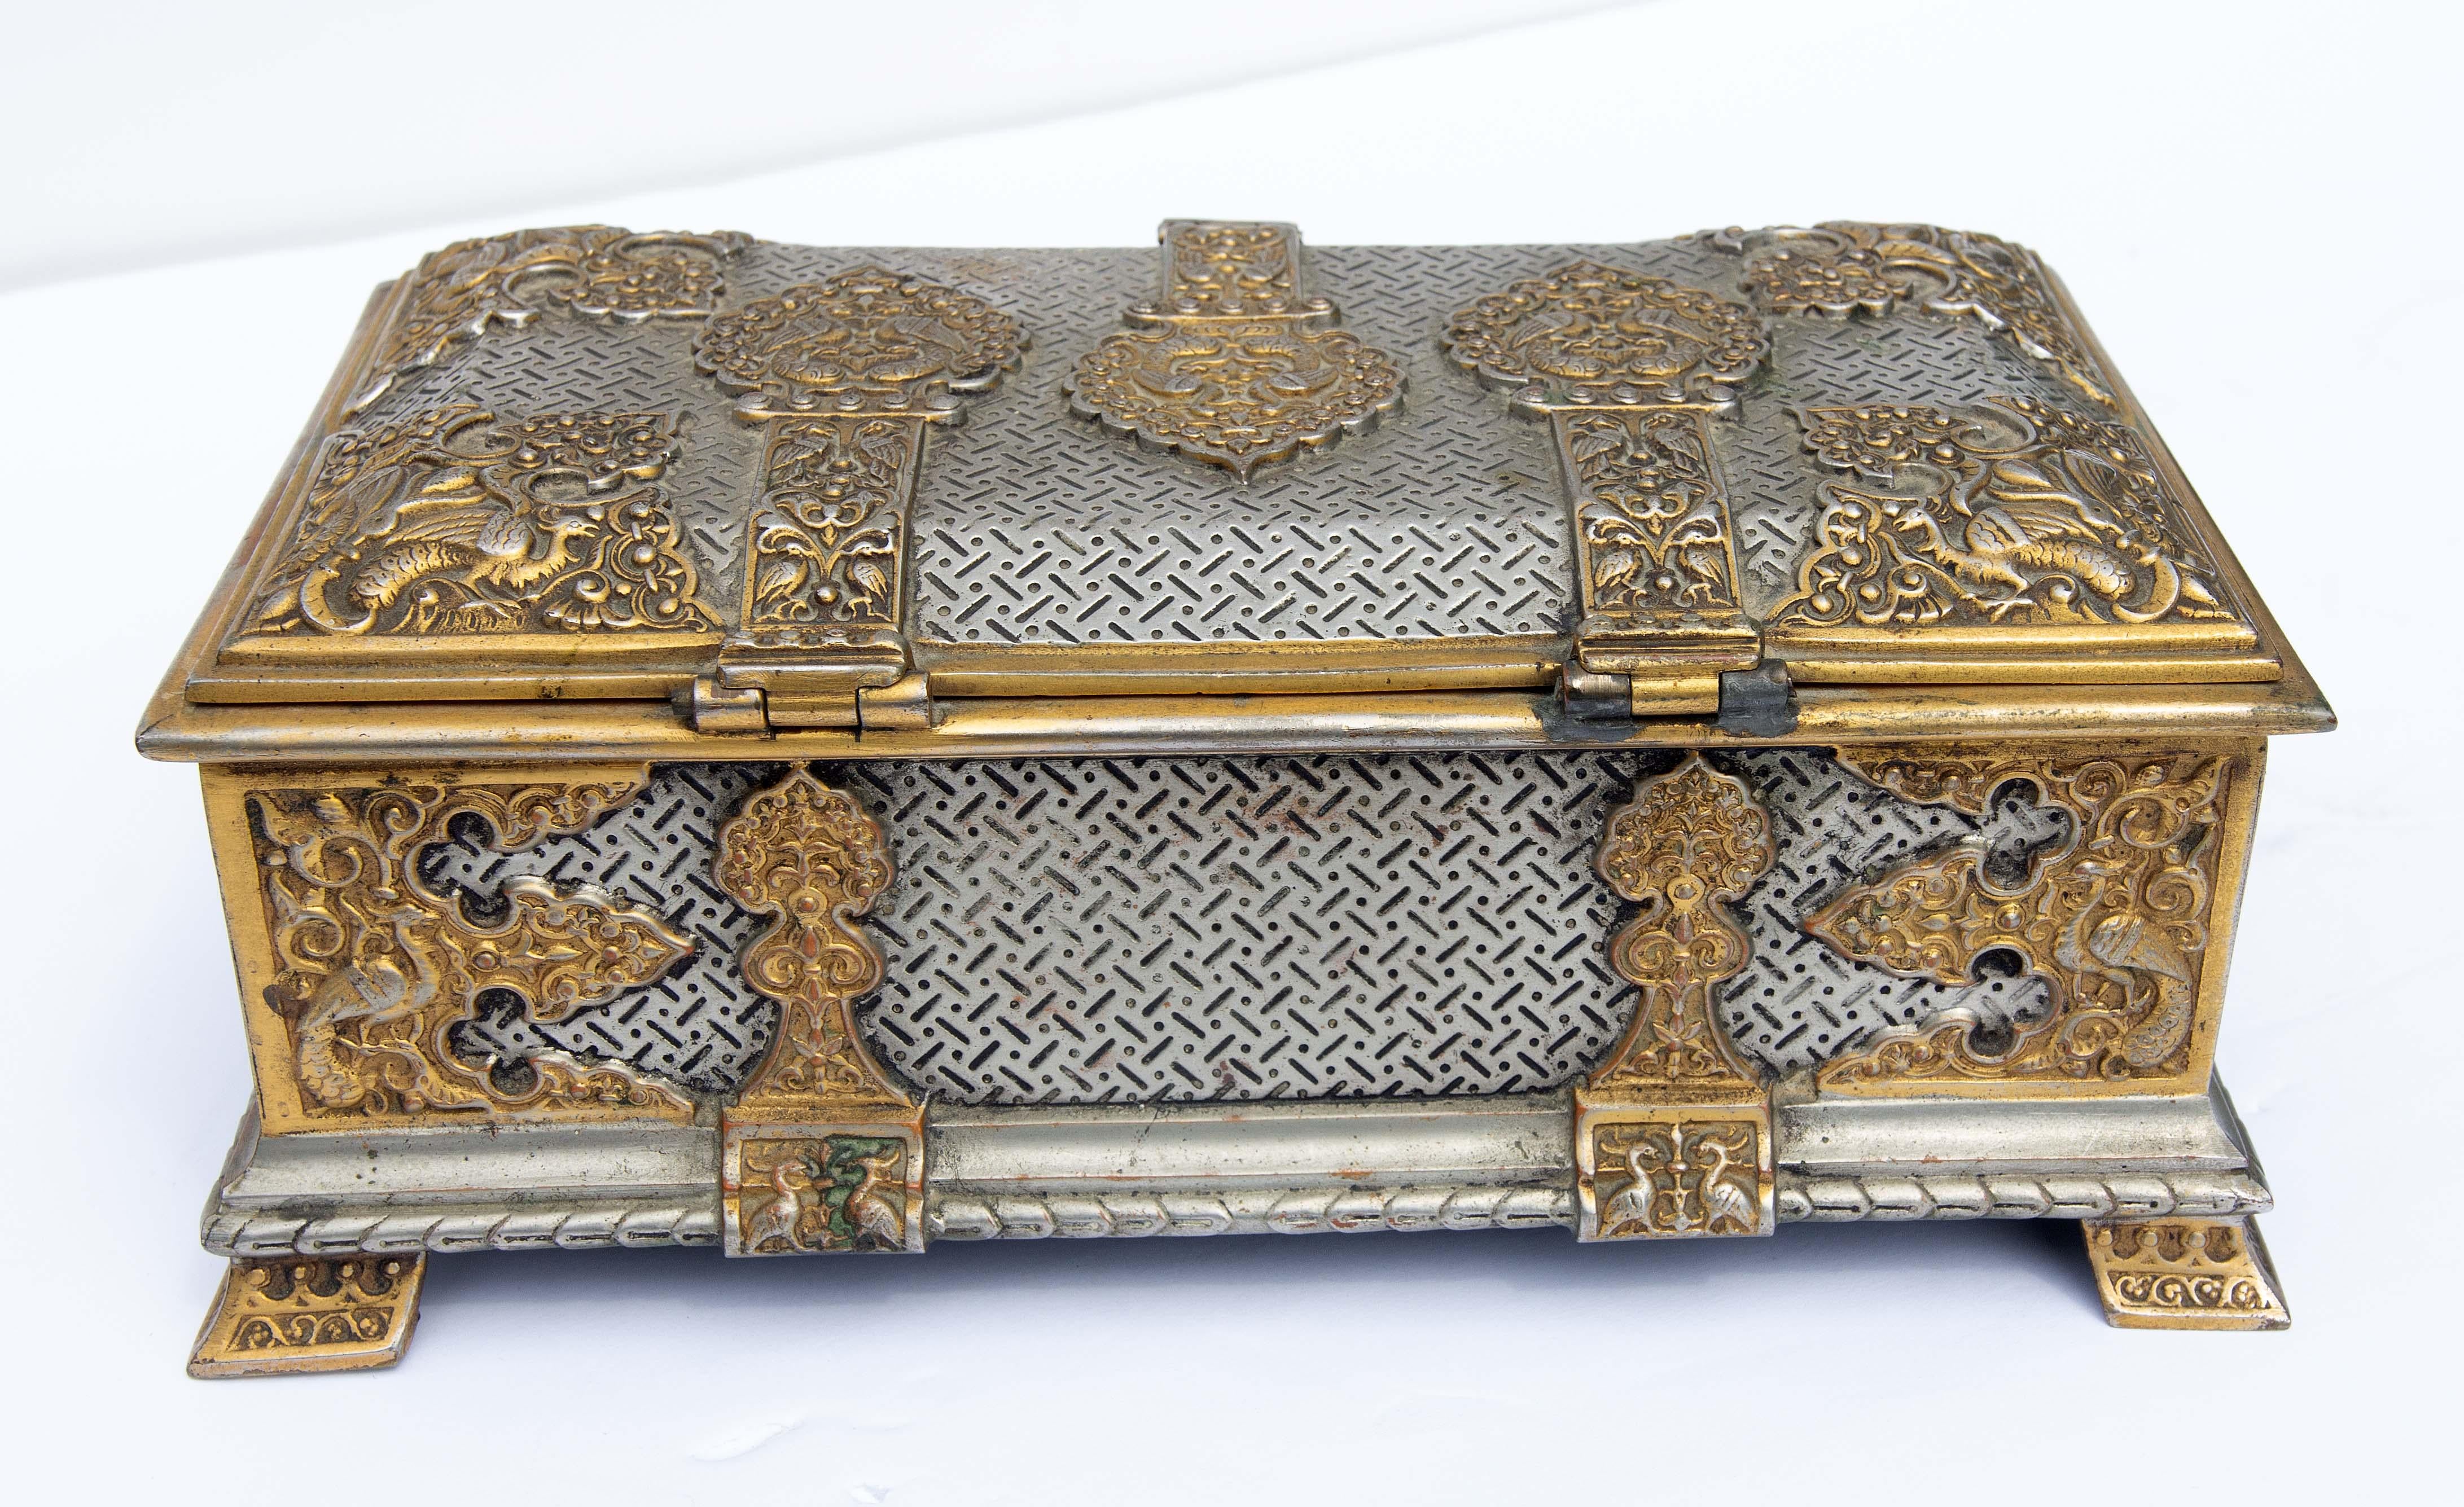 Orientalist silver and gold gilt bronze box. Continental. 19th century. Original key and velvet lining.